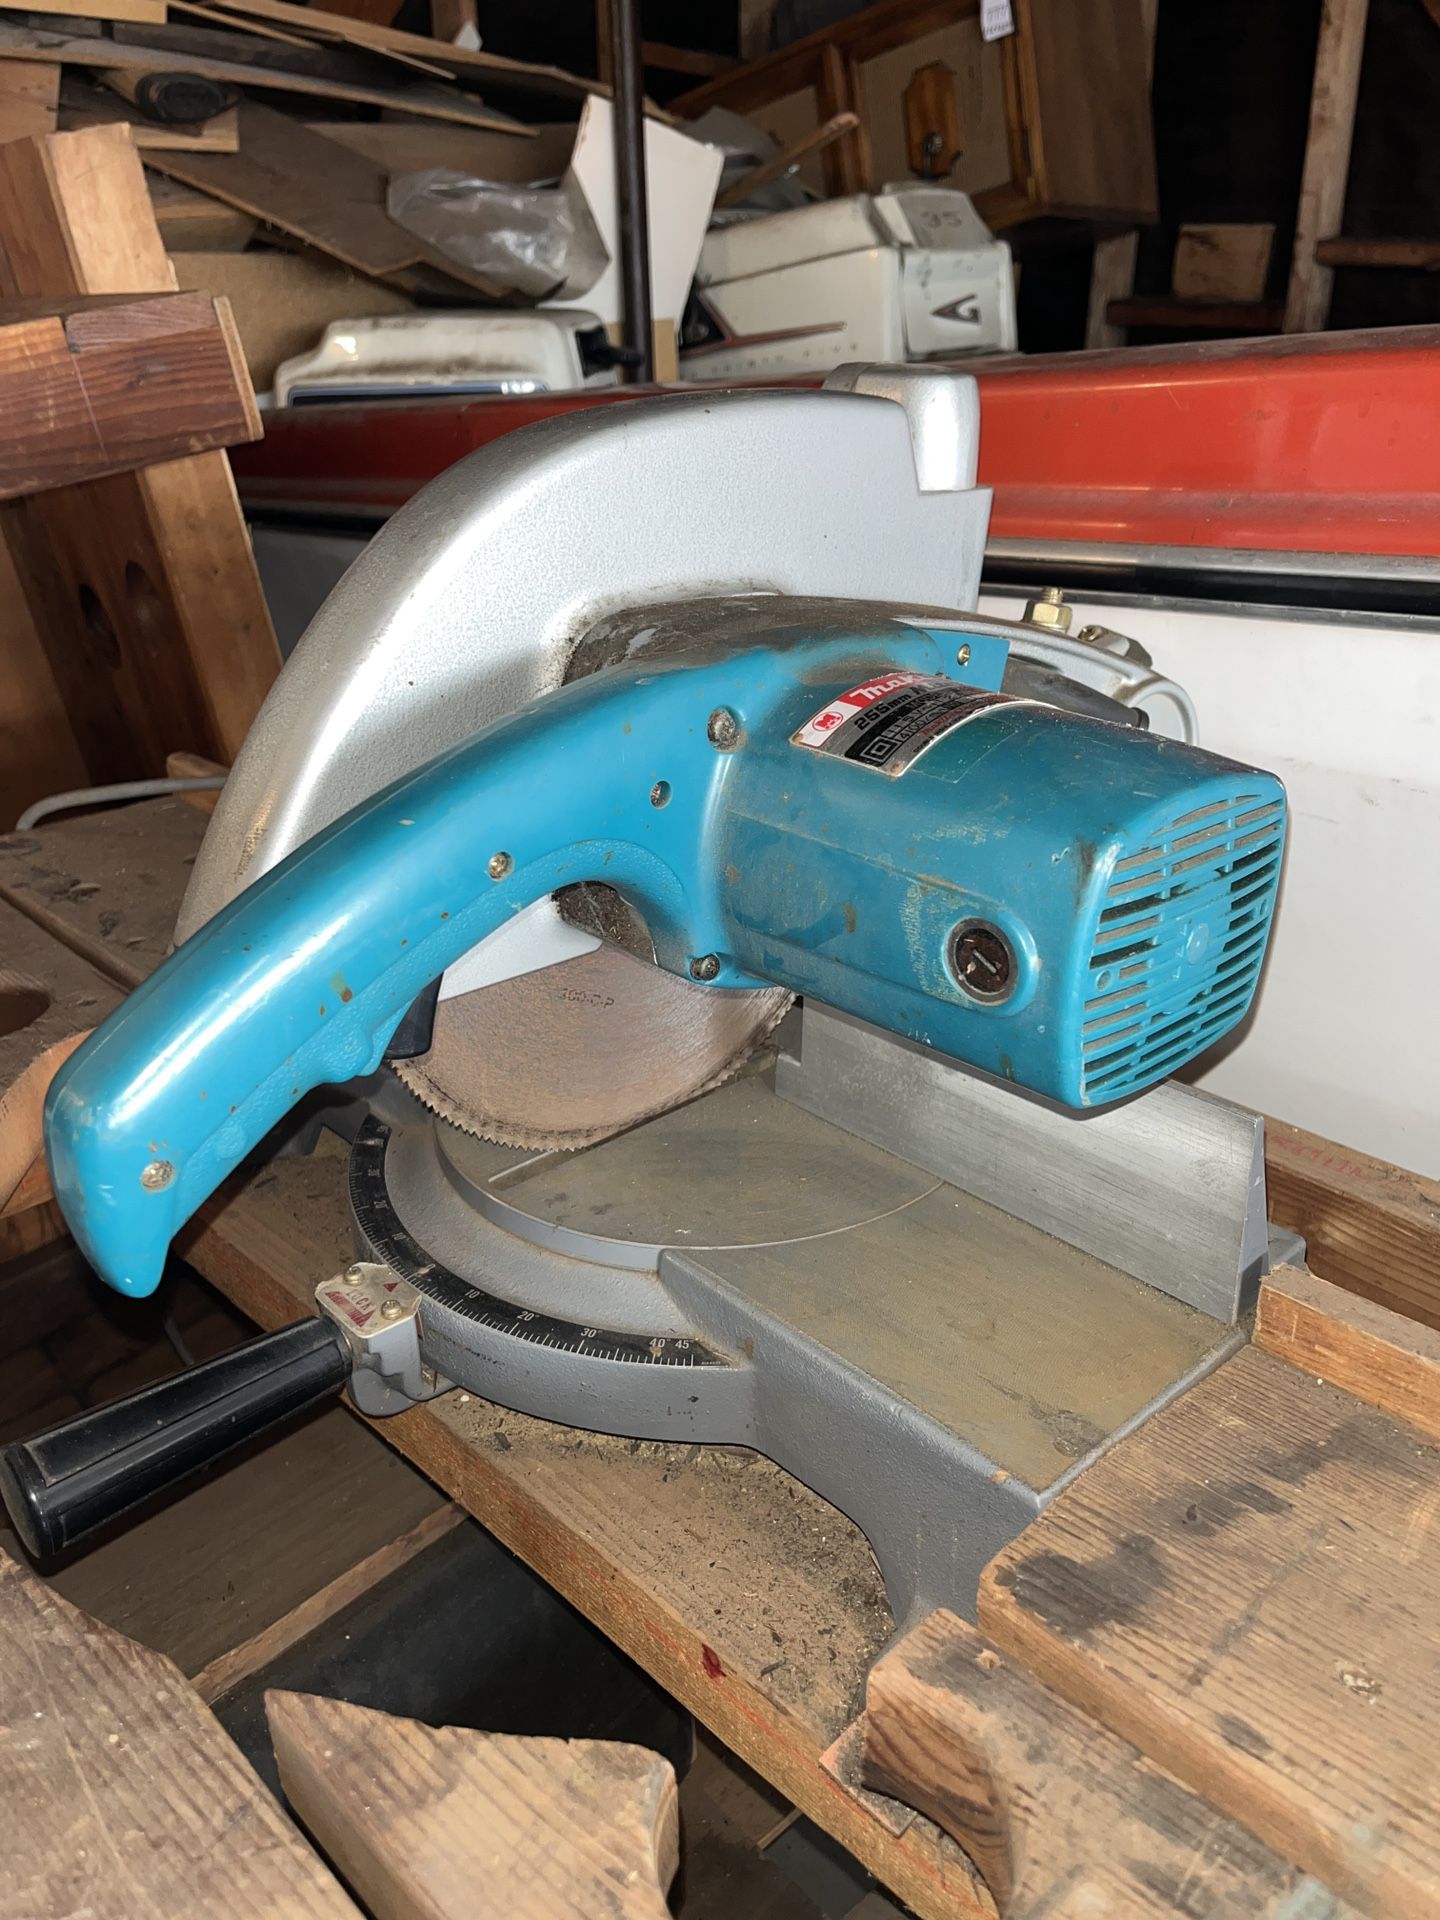 Makita Miter Saw With Roller Feeder